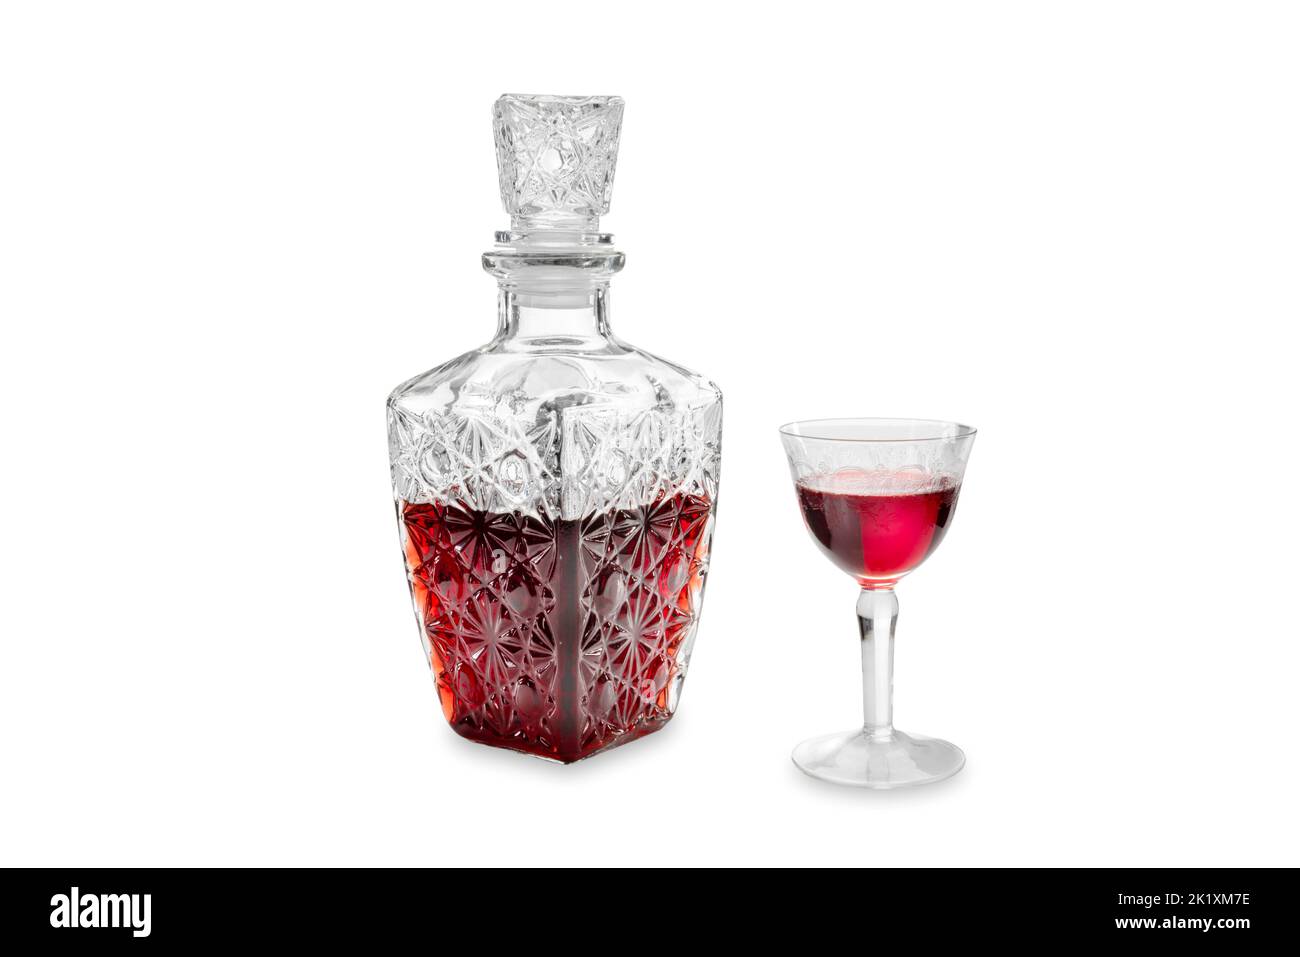 Red Cherry liquor in glass bottle decorated with vintage glass with decorative engravings isolated on white, clipping path Stock Photo